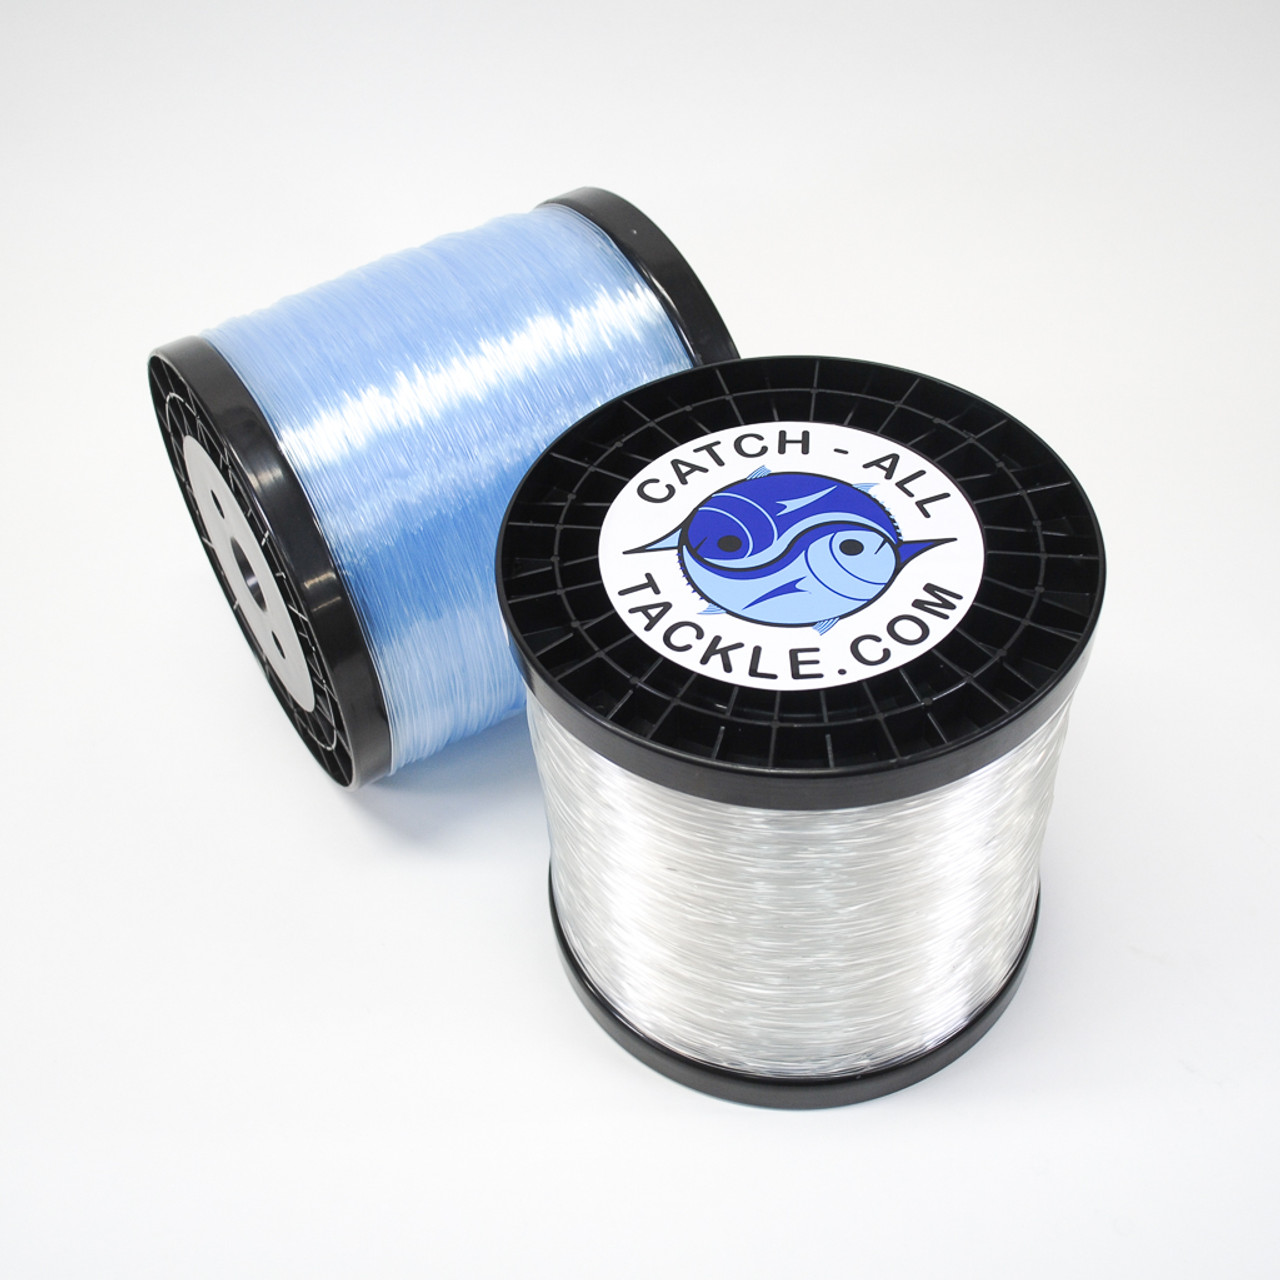 Sylcast blue 1 mile spool 40lb monofilament fishing line as used by top  anglers.